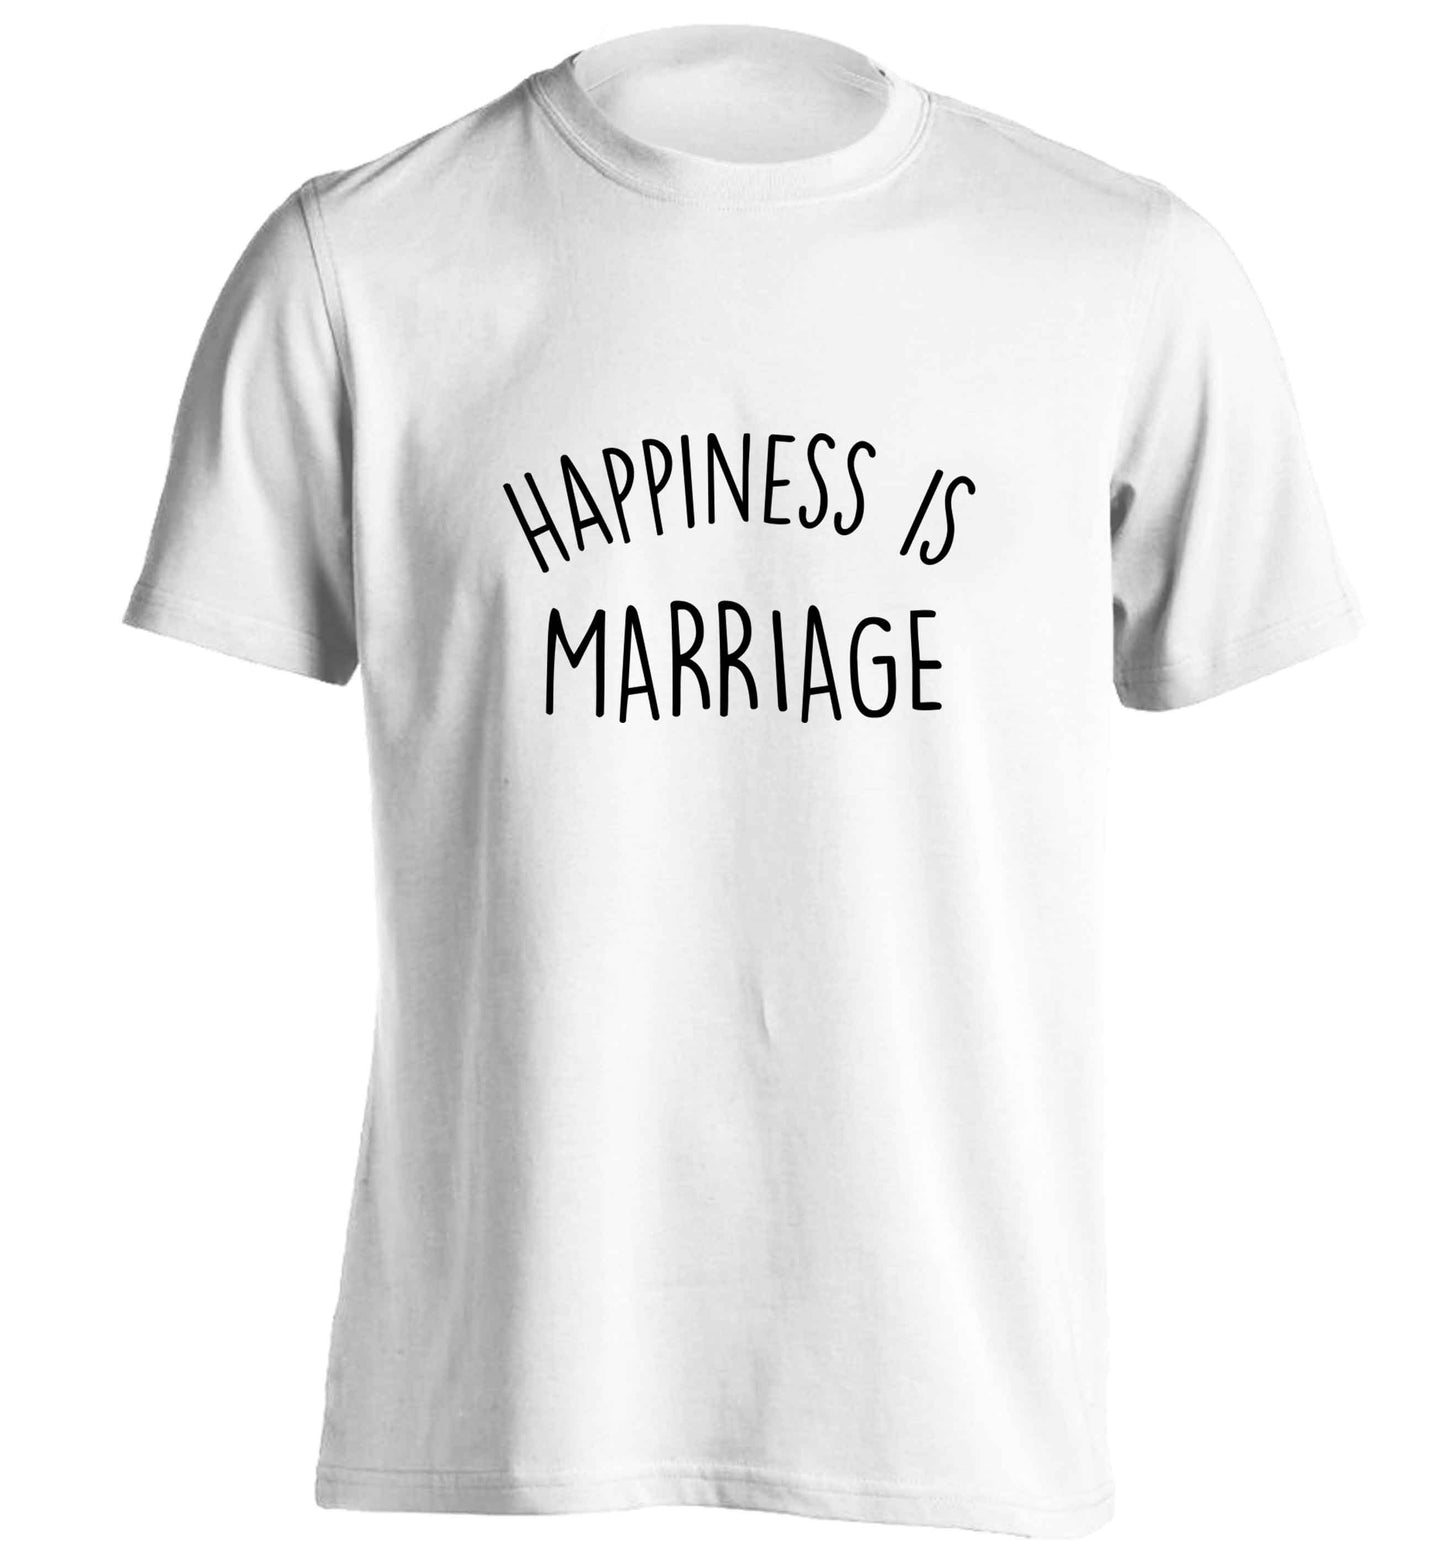 Happiness is wedding planning adults unisex white Tshirt 2XL